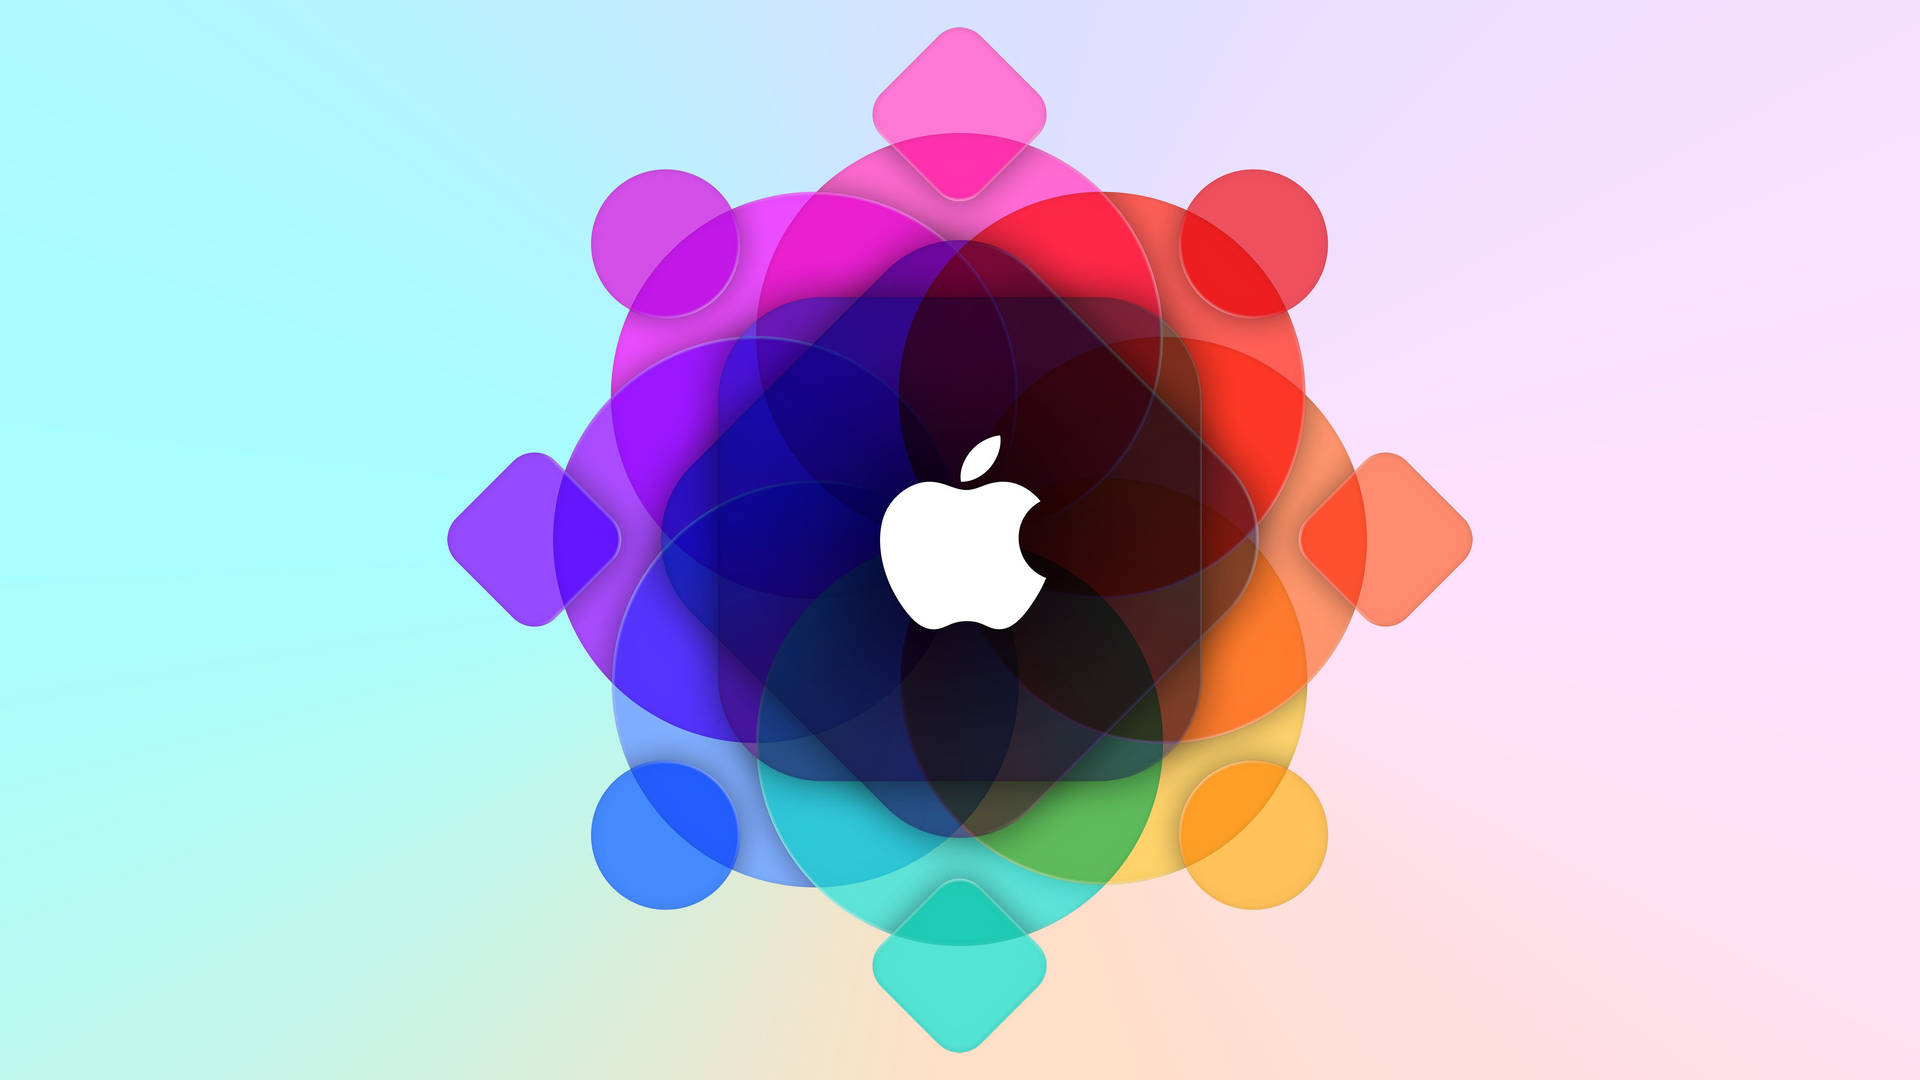 Colorful Apple Logo And Spheres Picture